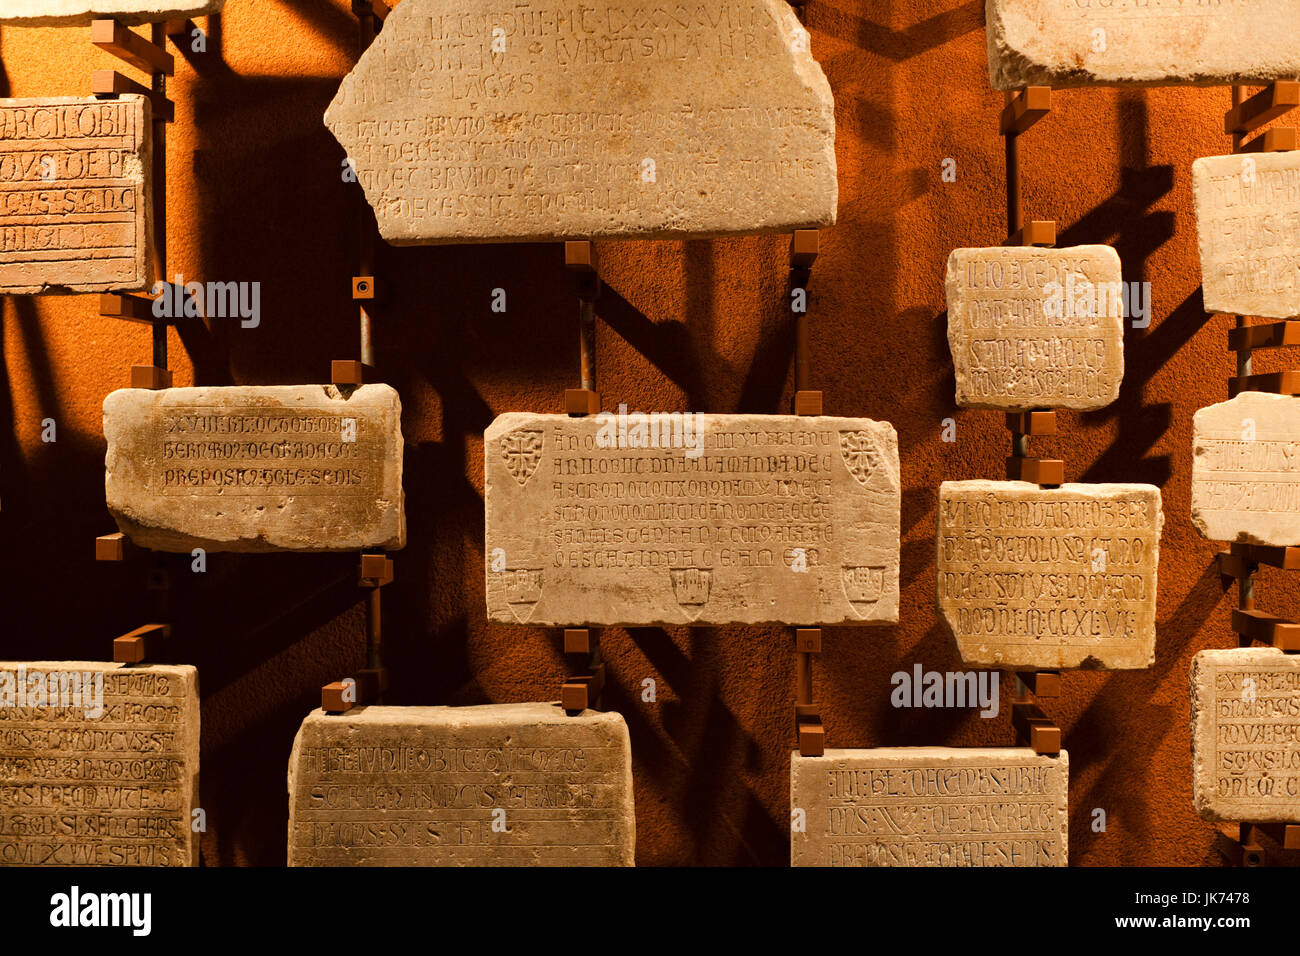 France, Midi-Pyrenees Region, Haute-Garonne Department, Toulouse, Musee des Augustins museum, stone tablets Stock Photo